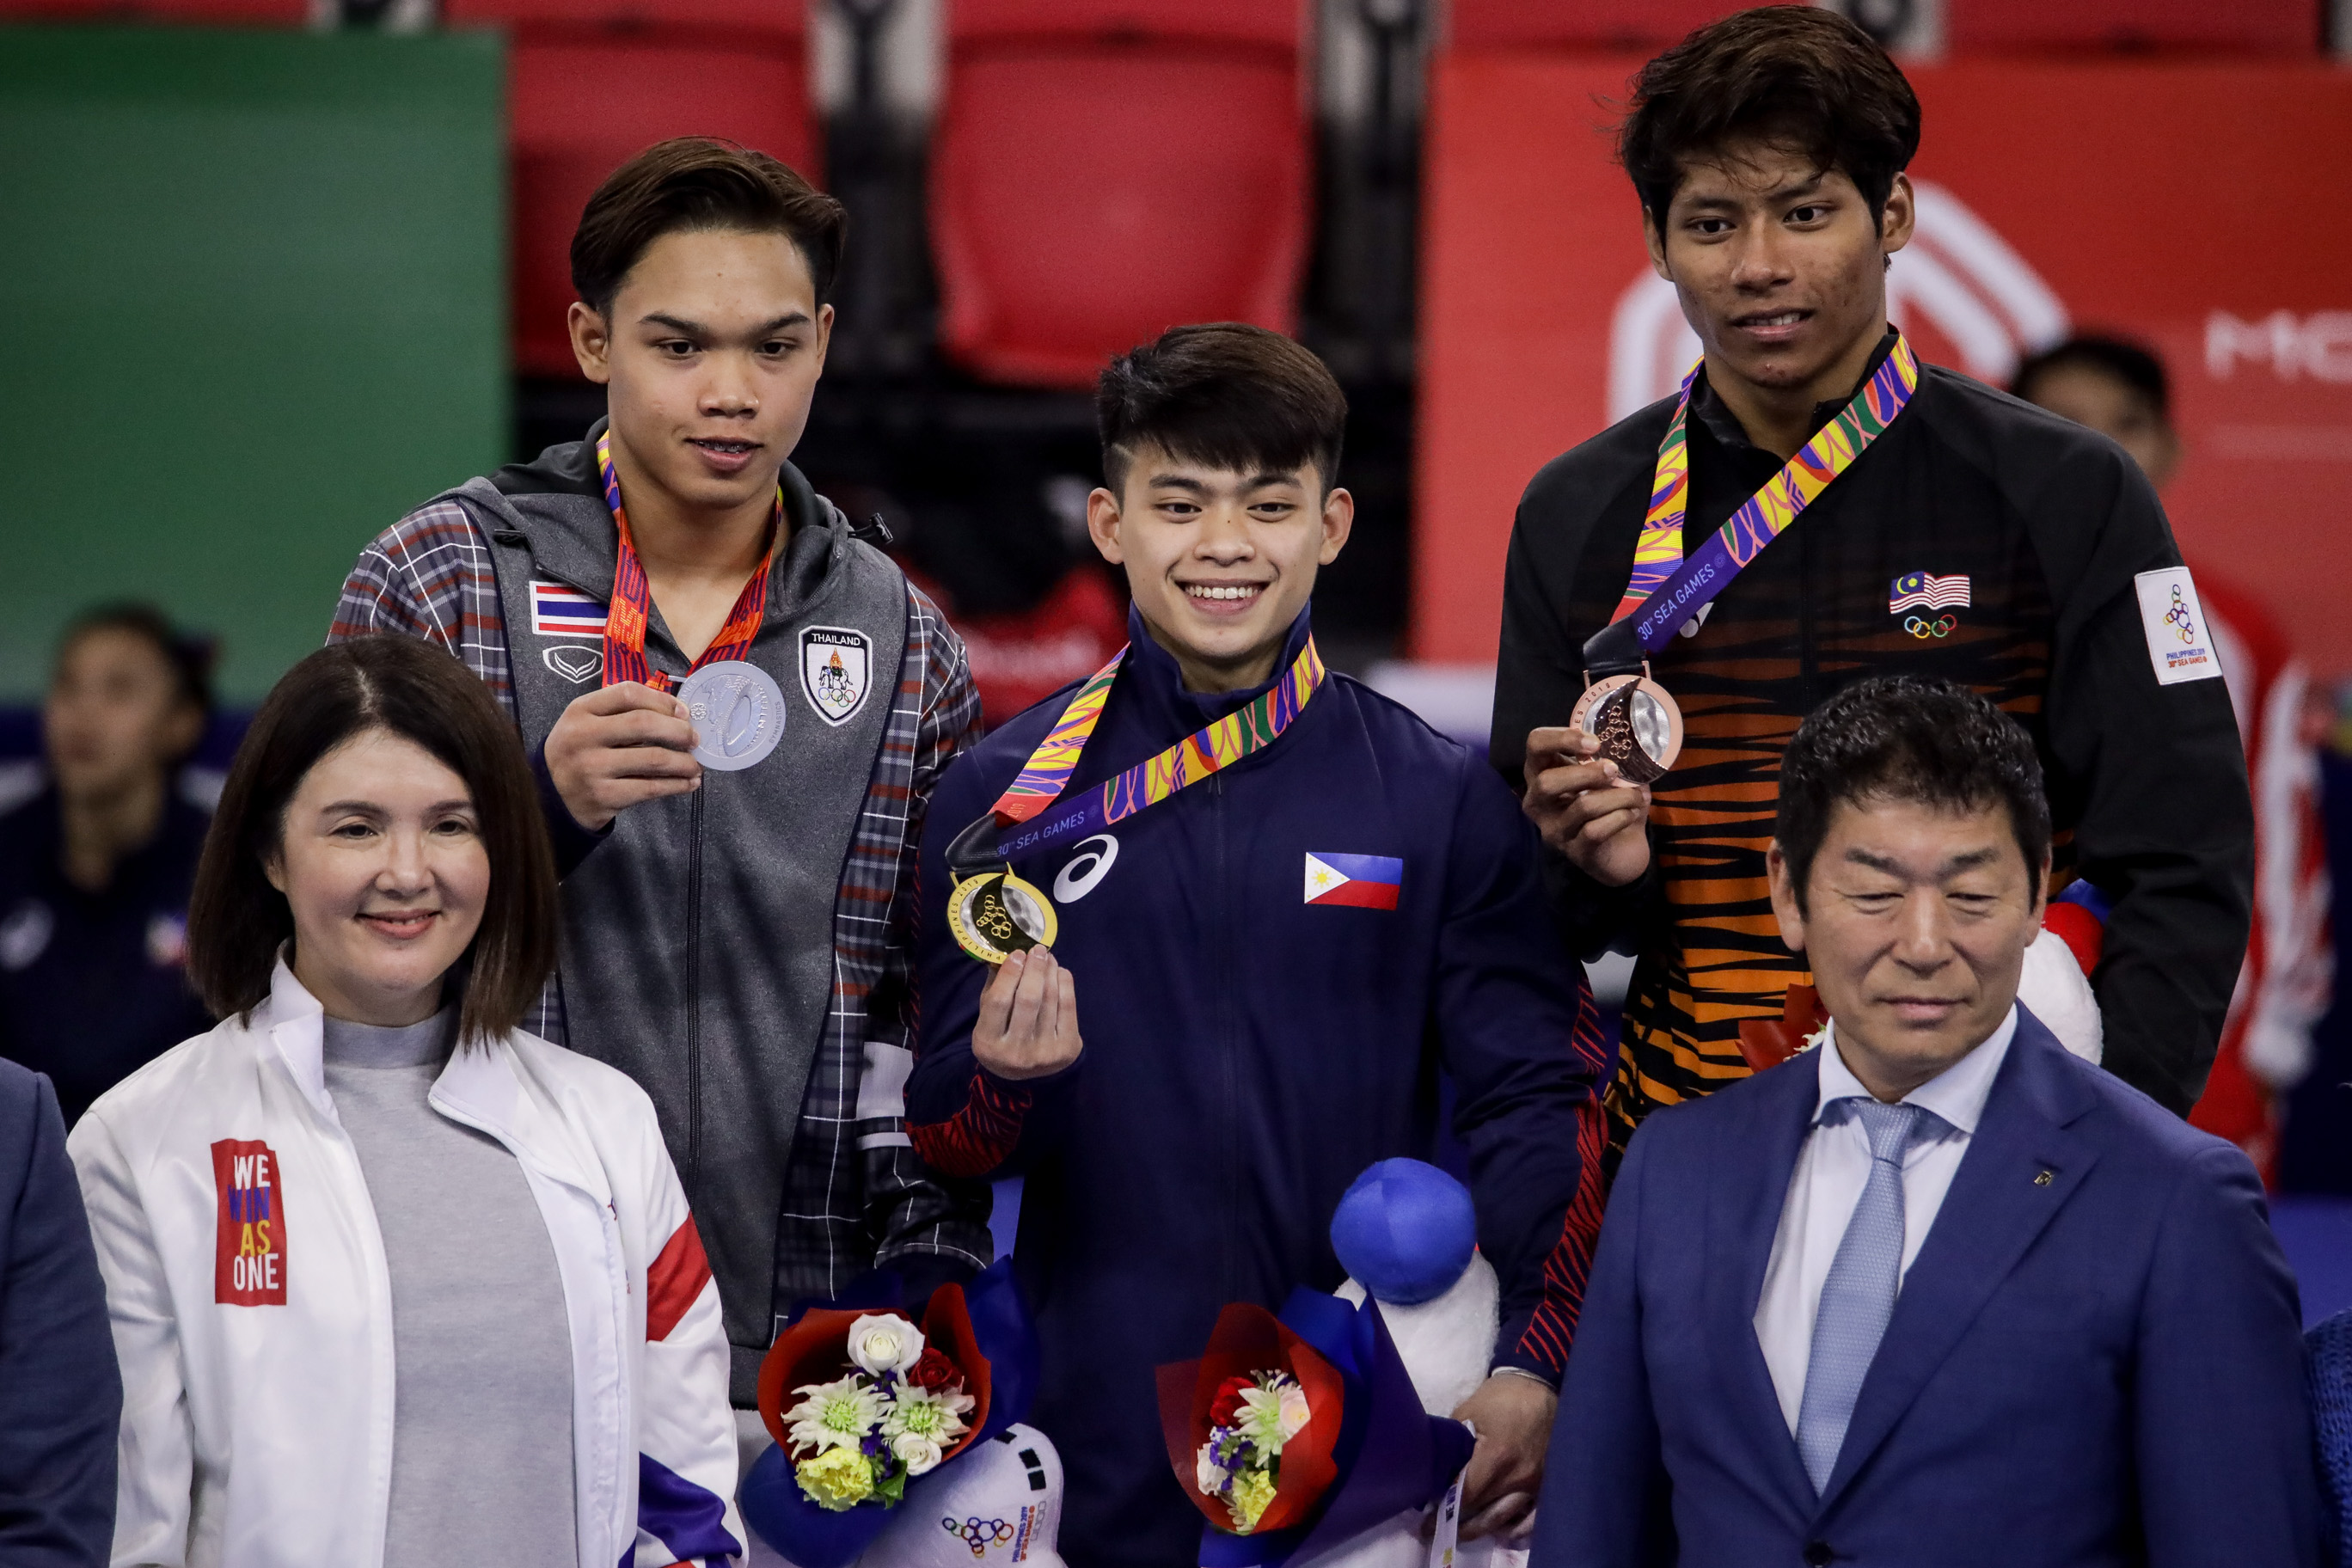 New Cash Windfall Pads Bonus For Medalists Inquirer Sports